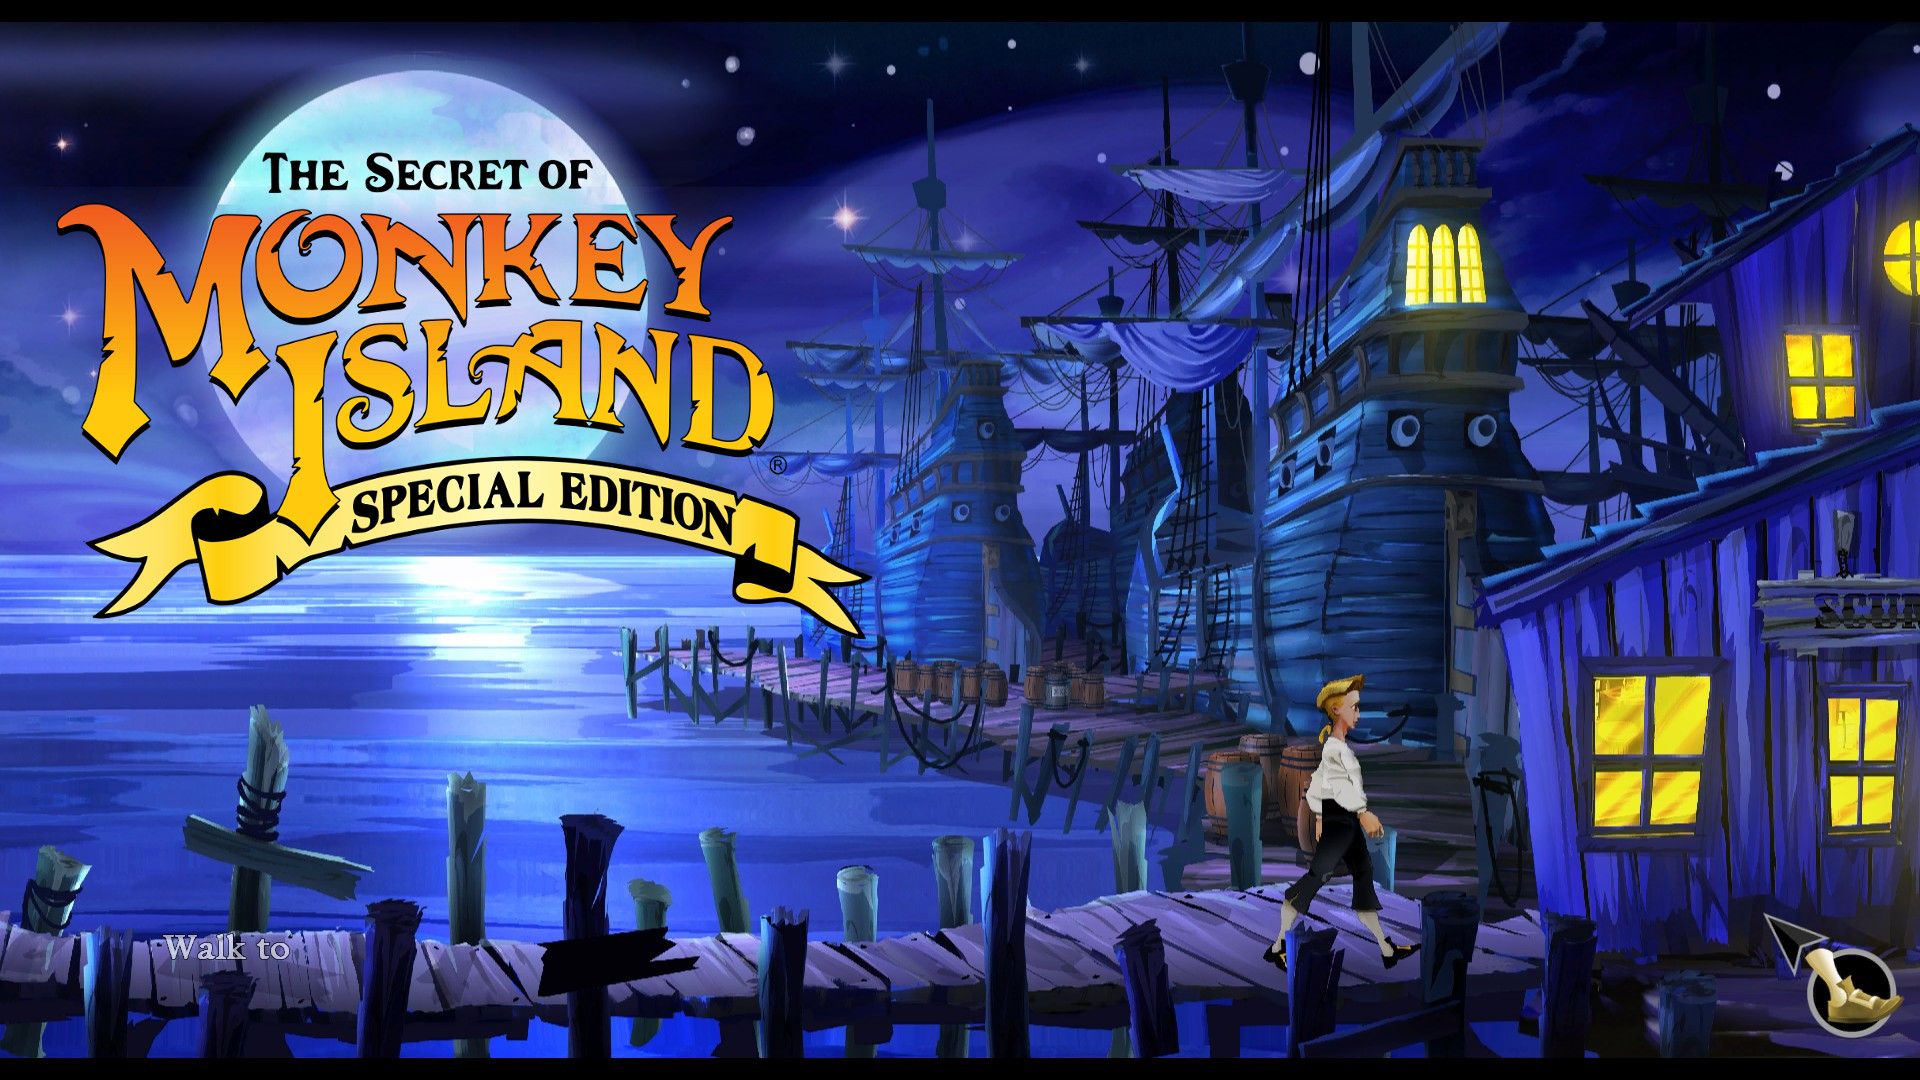 the secret of monkey island curse special edition anthology 2020 lucas lucasfilm limited run games LRG LRG3